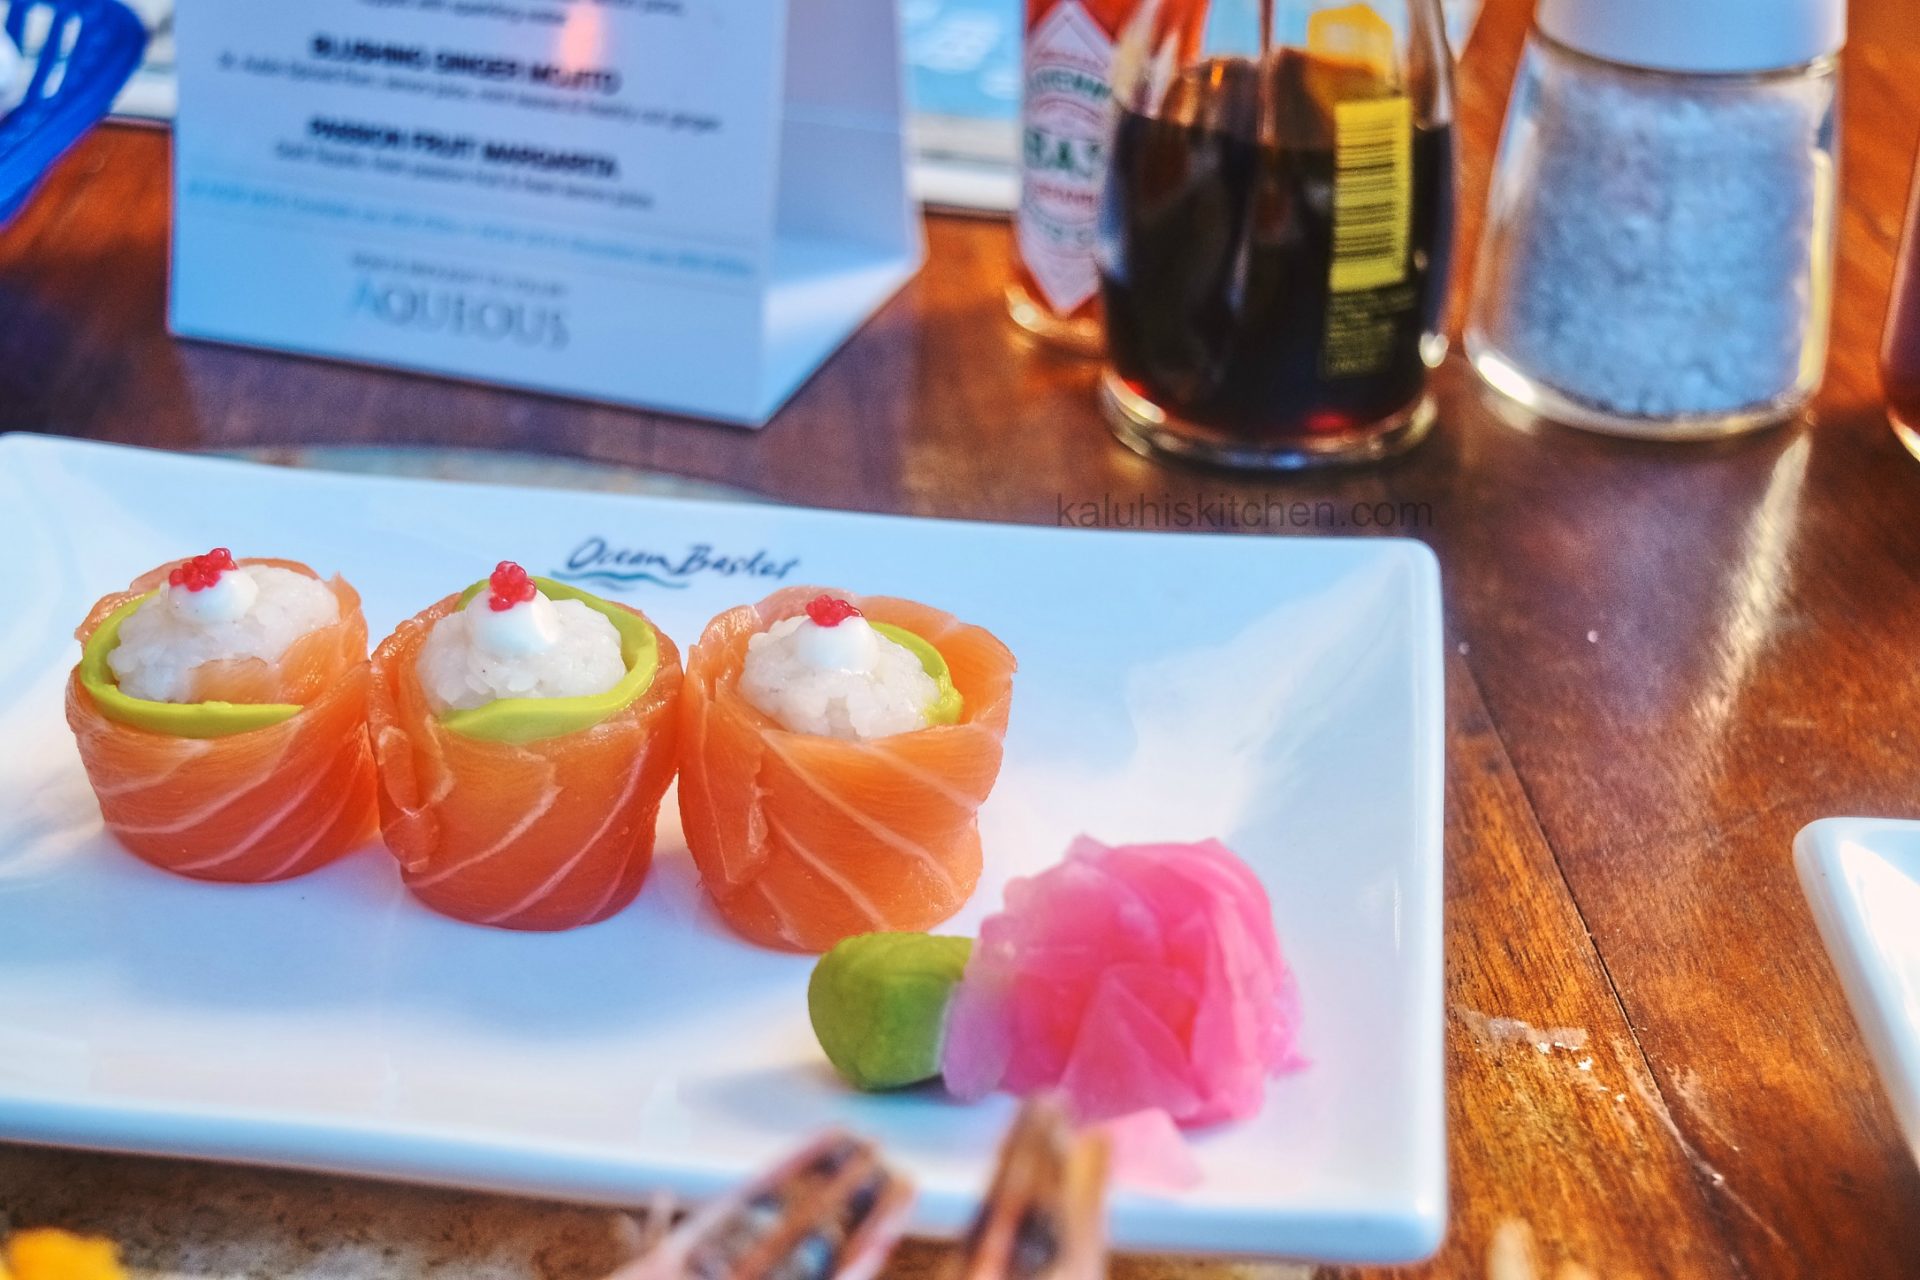 salmon roses at ocean basket served with pickled ginger which helps clear your palate and wasabi which aids in digestion_kaluhiskitchen.com